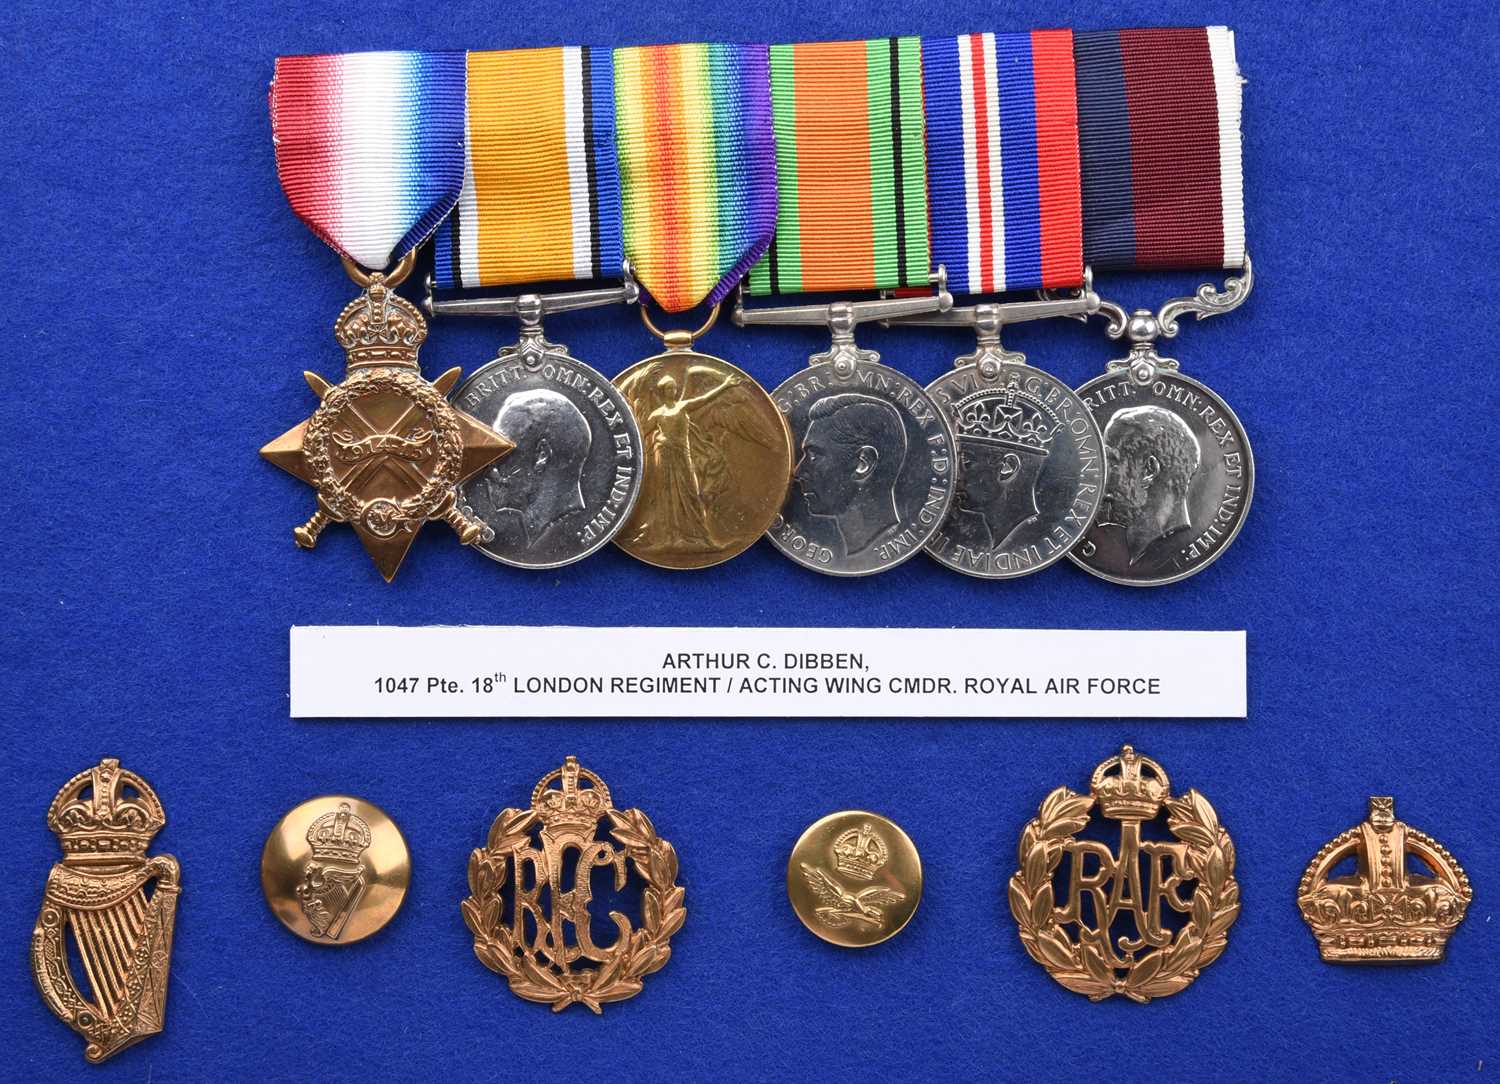 Six medals to Wing Commander Arthur Cleeve Dibben, Royal Air Force, formerly 18th London Regiment (